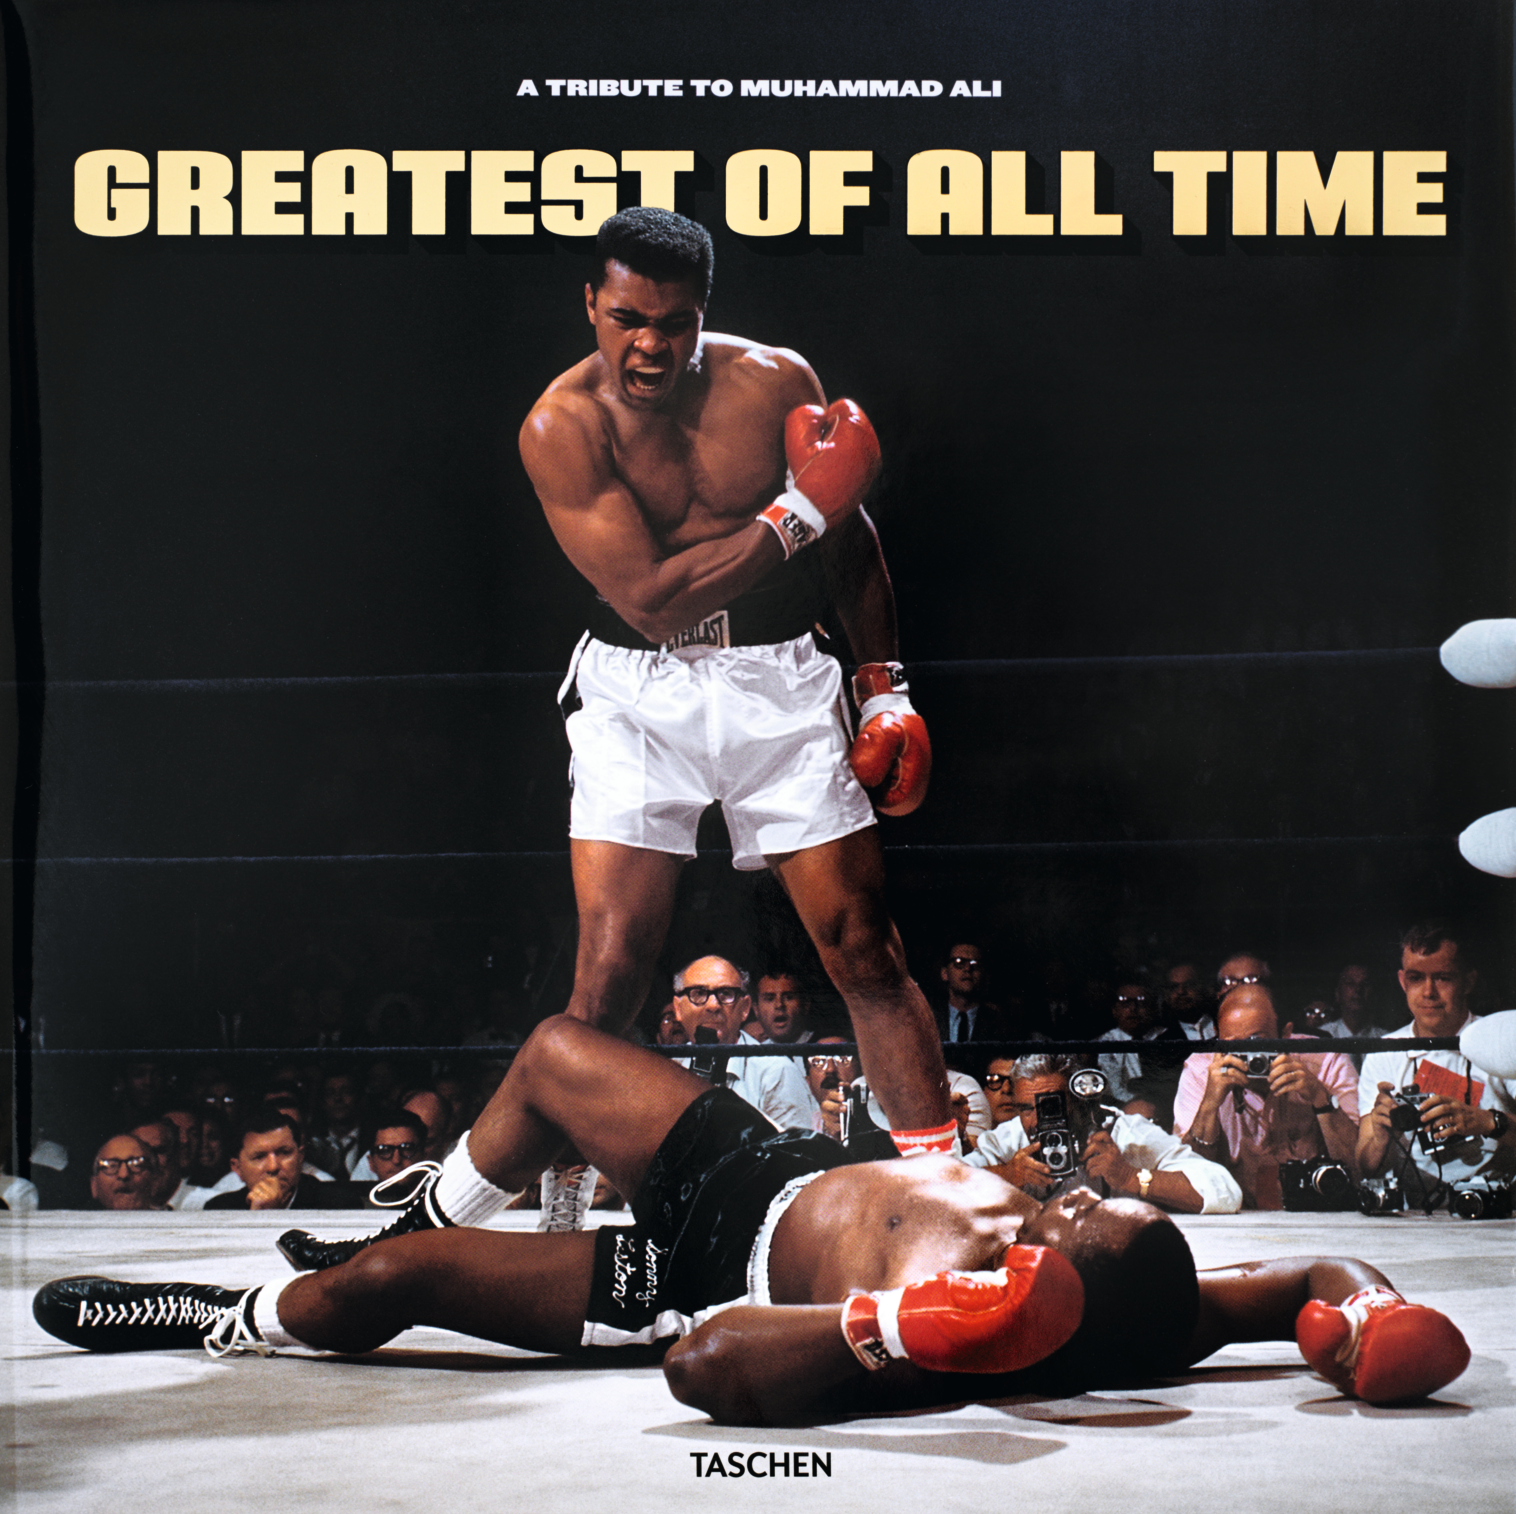 GOAT - Greatest of All Time. A Tribute to Muhammad Ali.